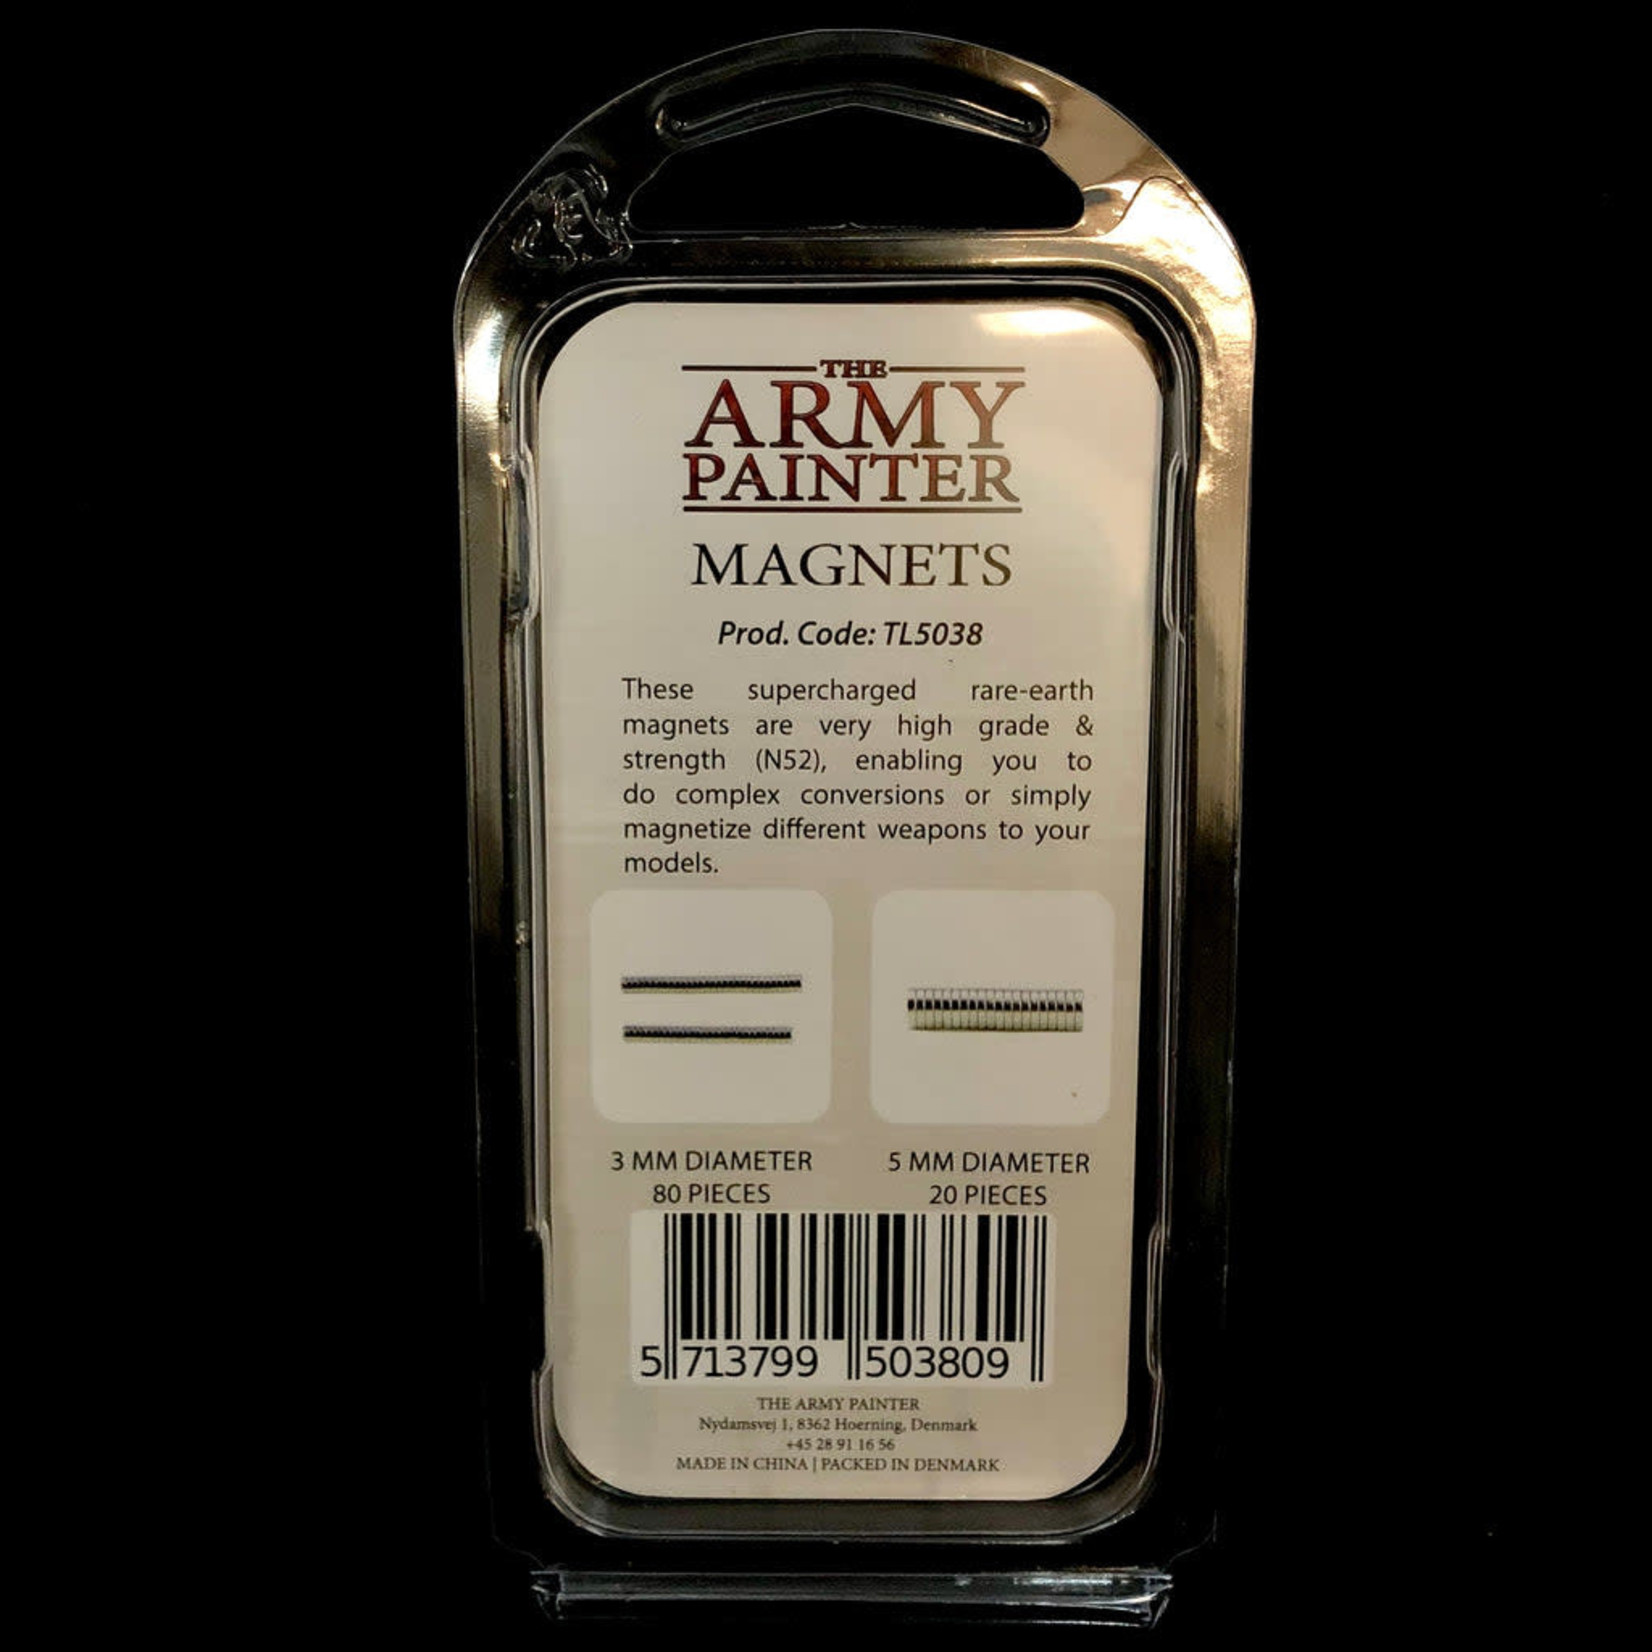 The Army Painter The Army Painter Miniature & Model Magnets